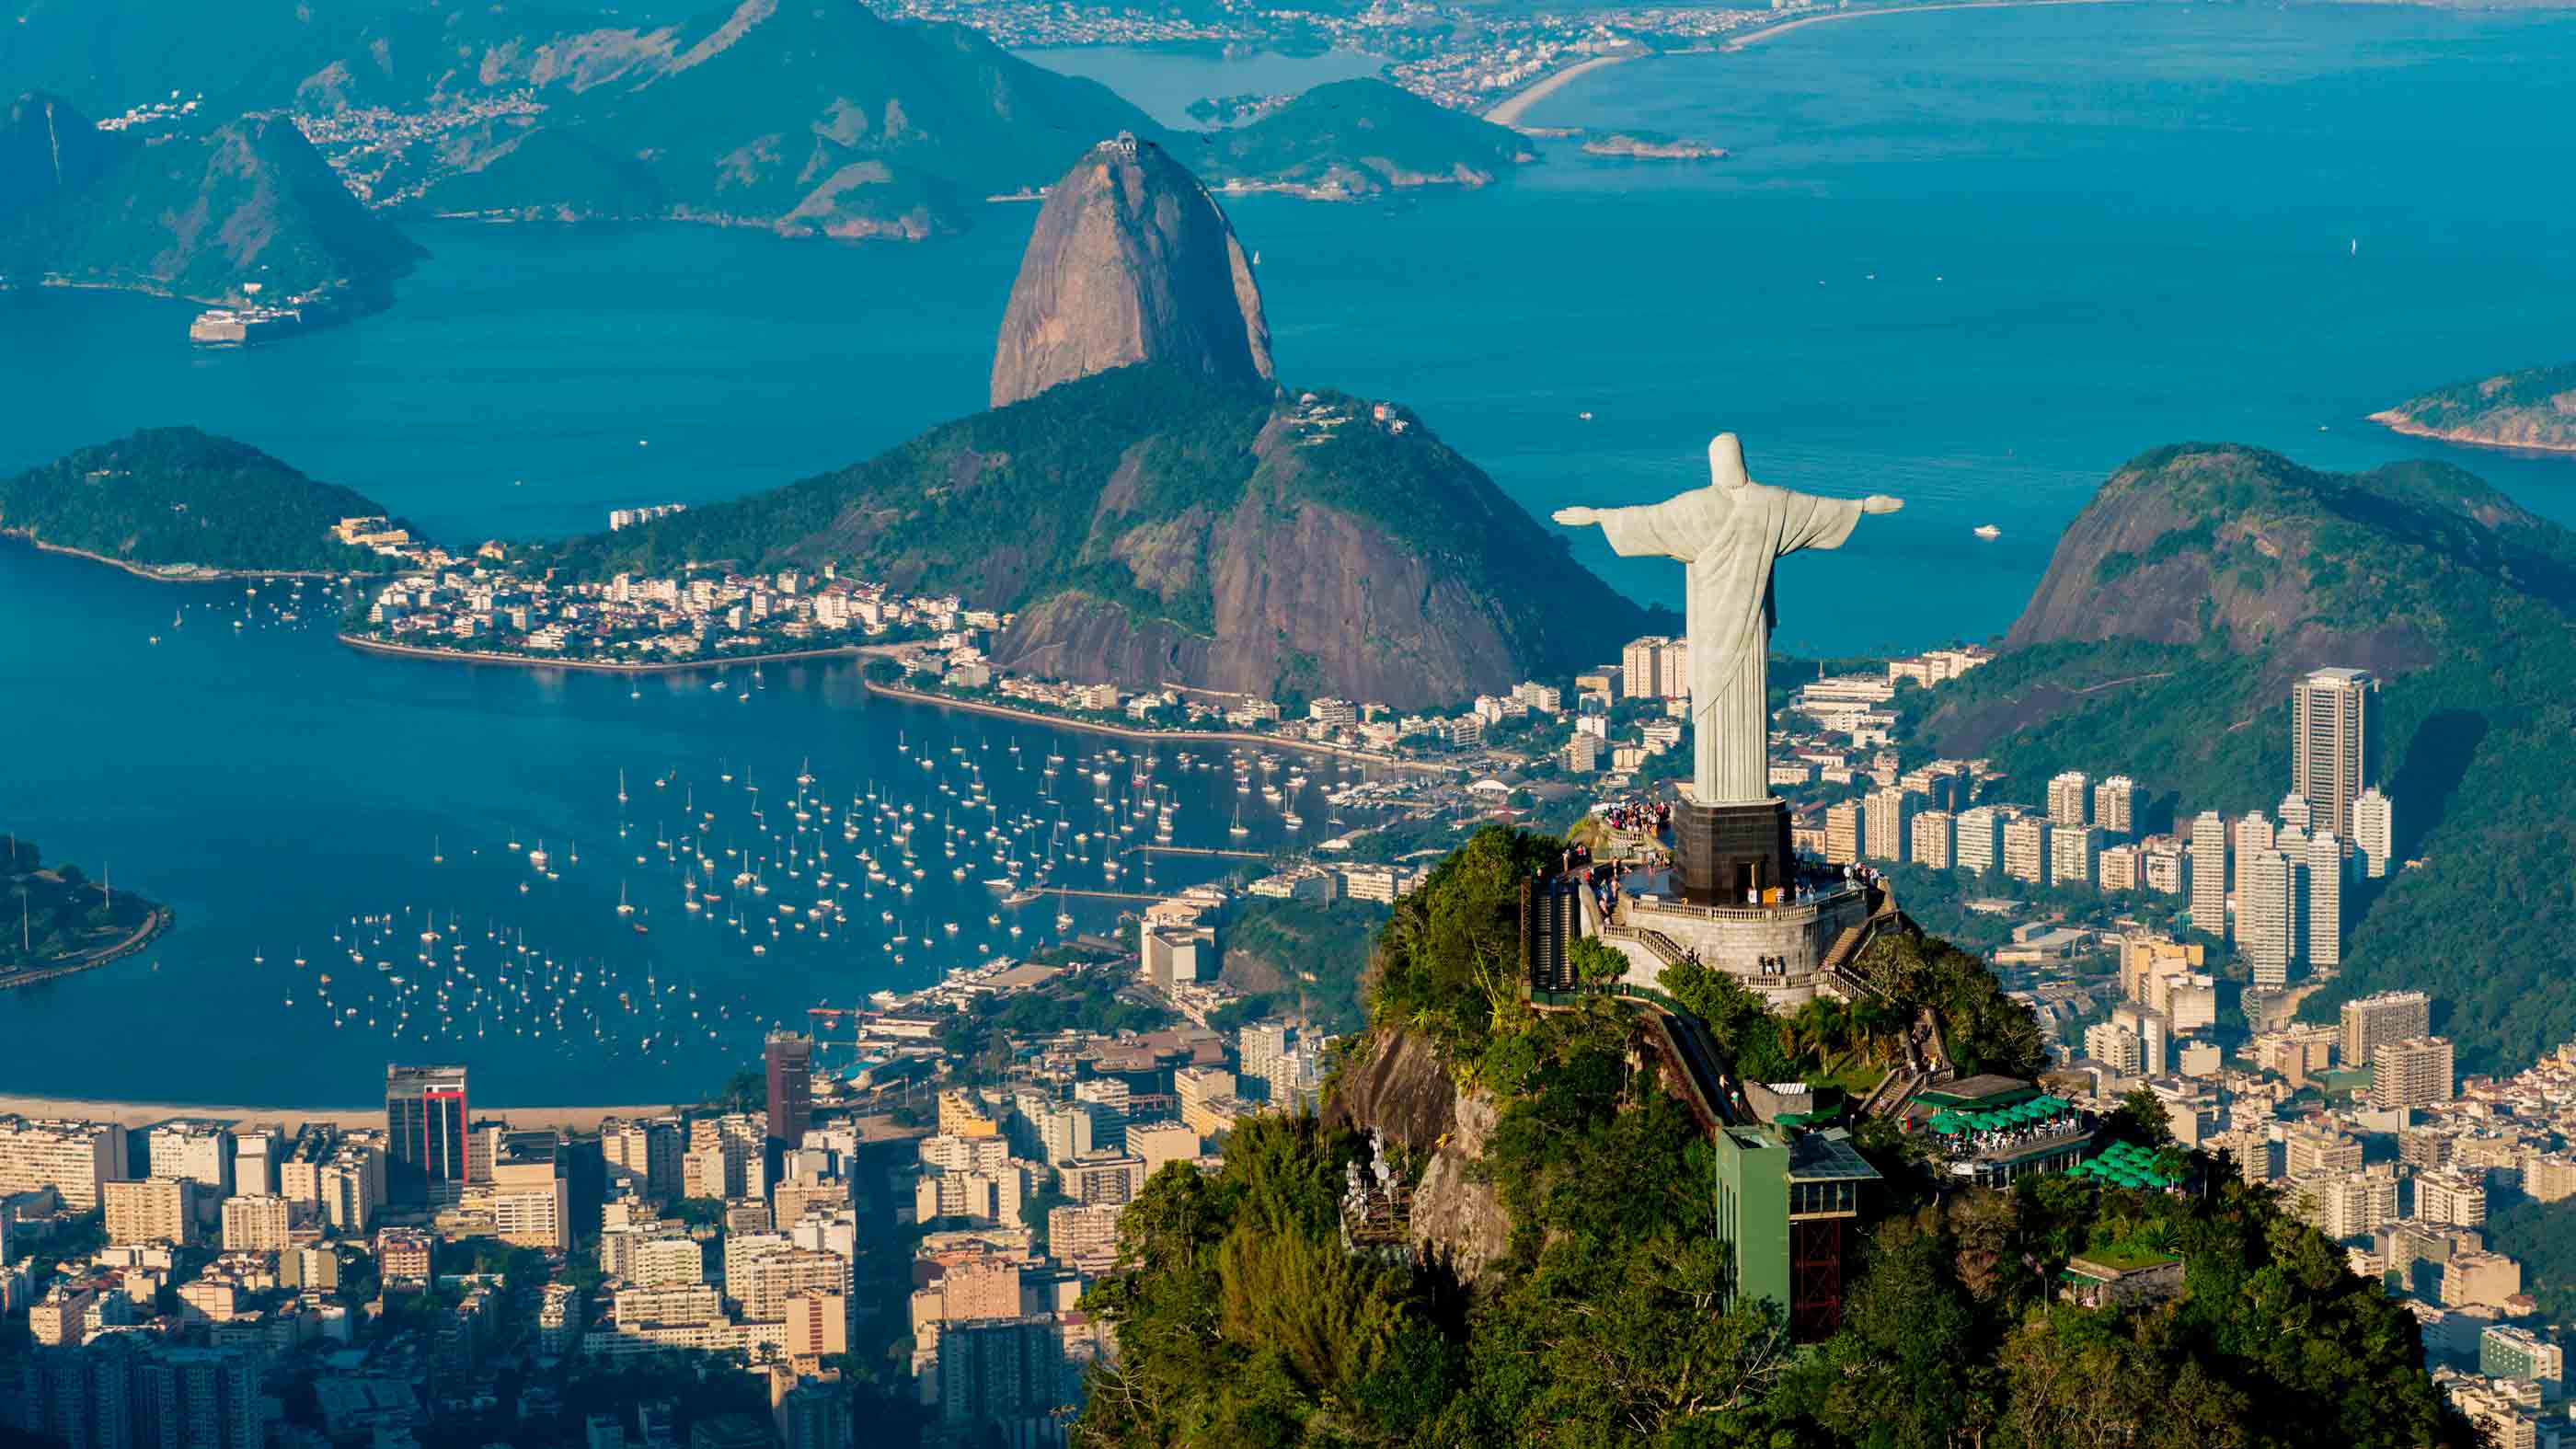 Can You Pass This Ultimate Quiz of “Two Truths and a Lie”? Rio de Janeiro, Brazil